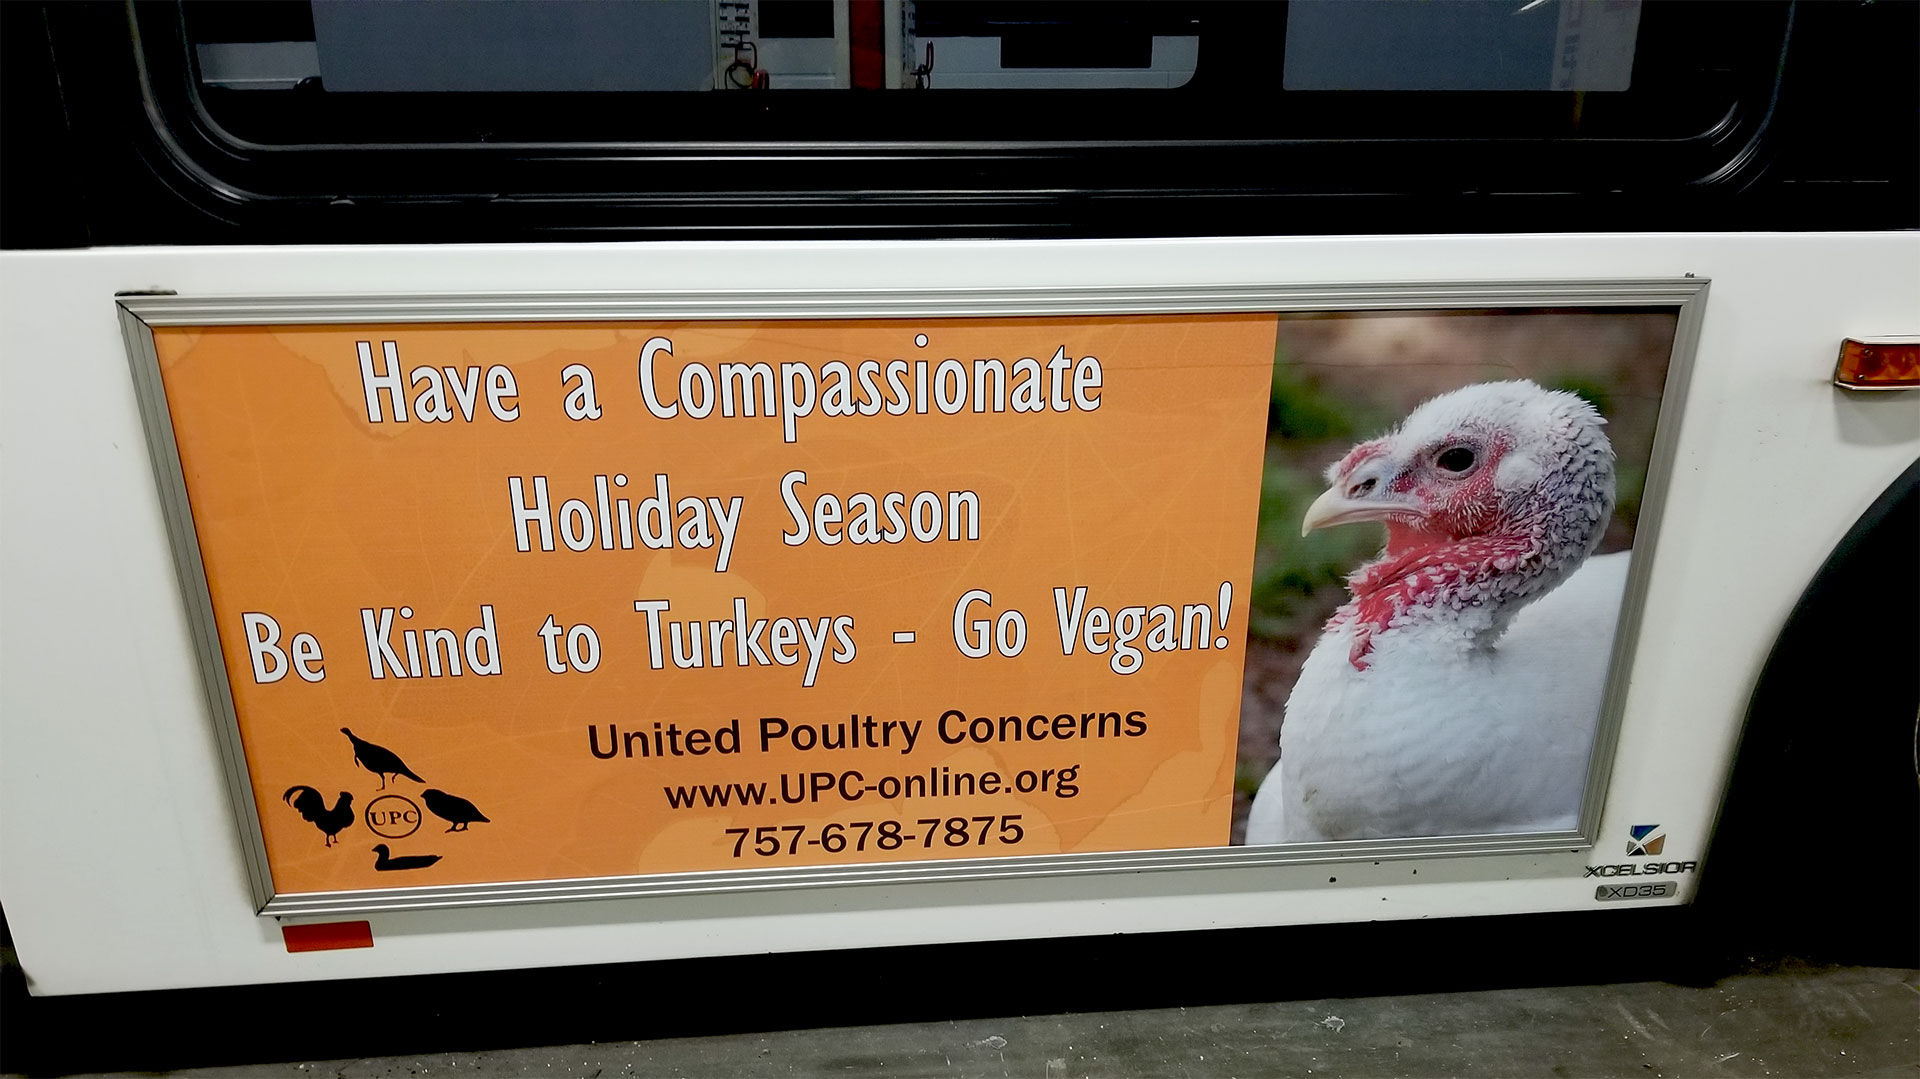 Have a compassionate holiday sign on a bus